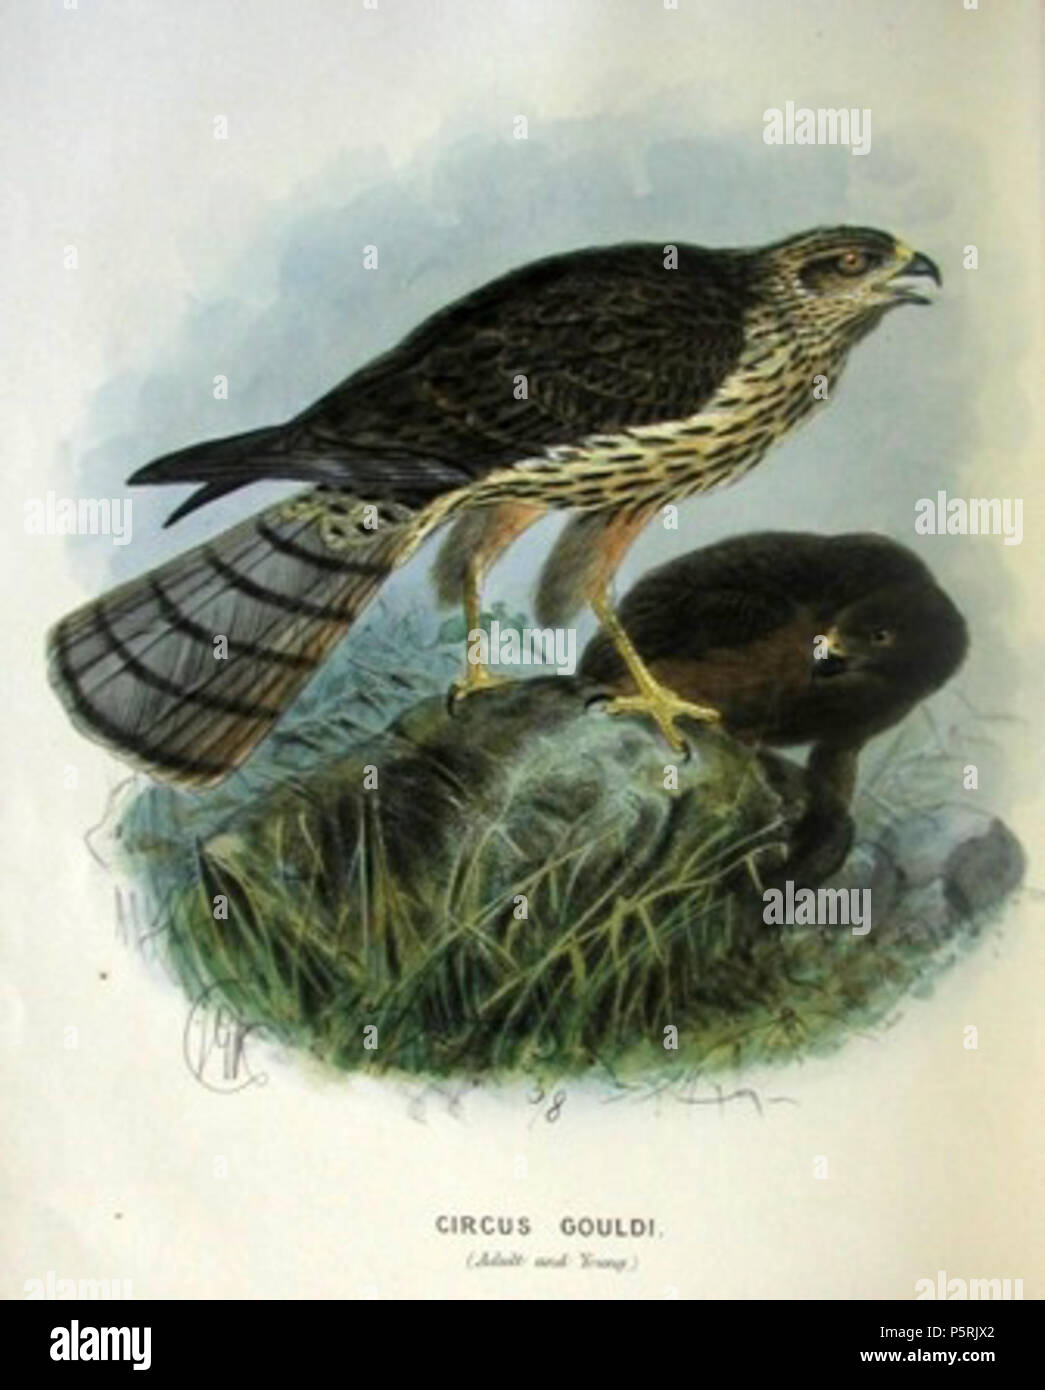 N/A. English: Title “Circus gouldi (Adult and Young)”. Juvenile (right) and adult Swamp Harrier (Circus approximans gouldi), subspecies of New Zealand. Originally published in: Walter Lawry Buller: Birds of New Zealand, 1873. Deutsch: Titel: „Circus gouldi (Adult and Young)“. Juvenile (rechts) und adulte Sumpfweihe (Circus approximans gouldi), neuseeländische Unterart. Ursprünglich aus: Walter Lawry Buller: Birds of New Zealand, 1873. 1873.   John Gerrard Keulemans  (1842–1912)      Alternative names Johannes Gerardus Keulemans; J. G. Keulemans  Description Dutch ornithologist and artist  Date Stock Photo